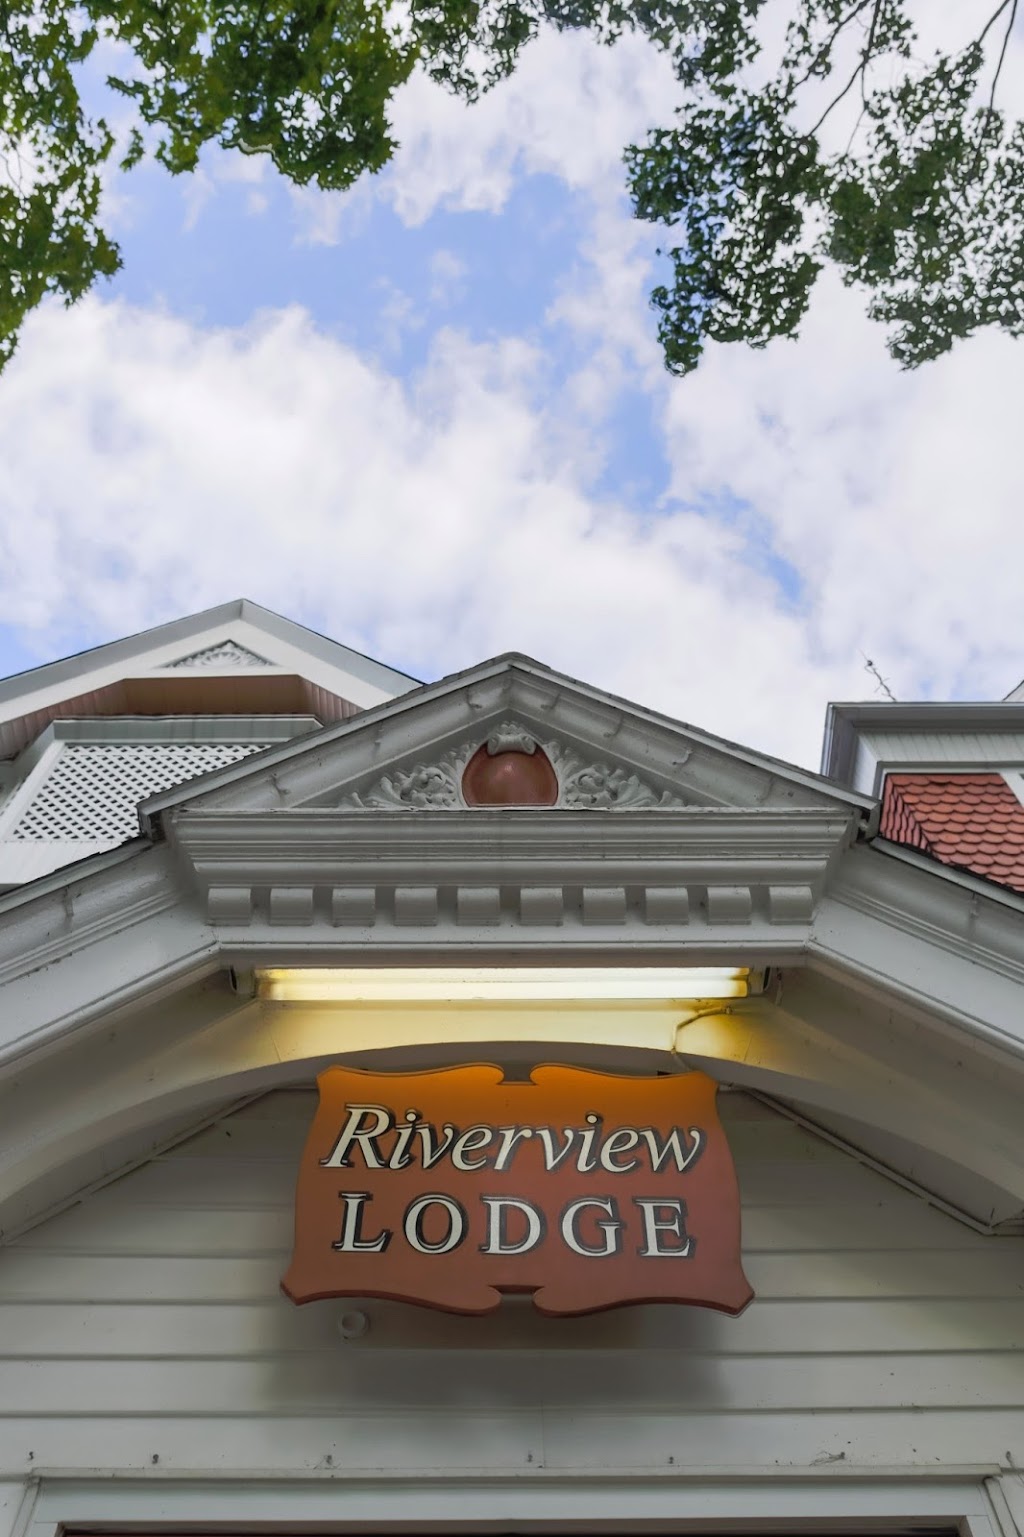 Riverview Lodge Residential Care Home | 10 Prospect St, Deep River, CT 06417 | Phone: (860) 526-4941